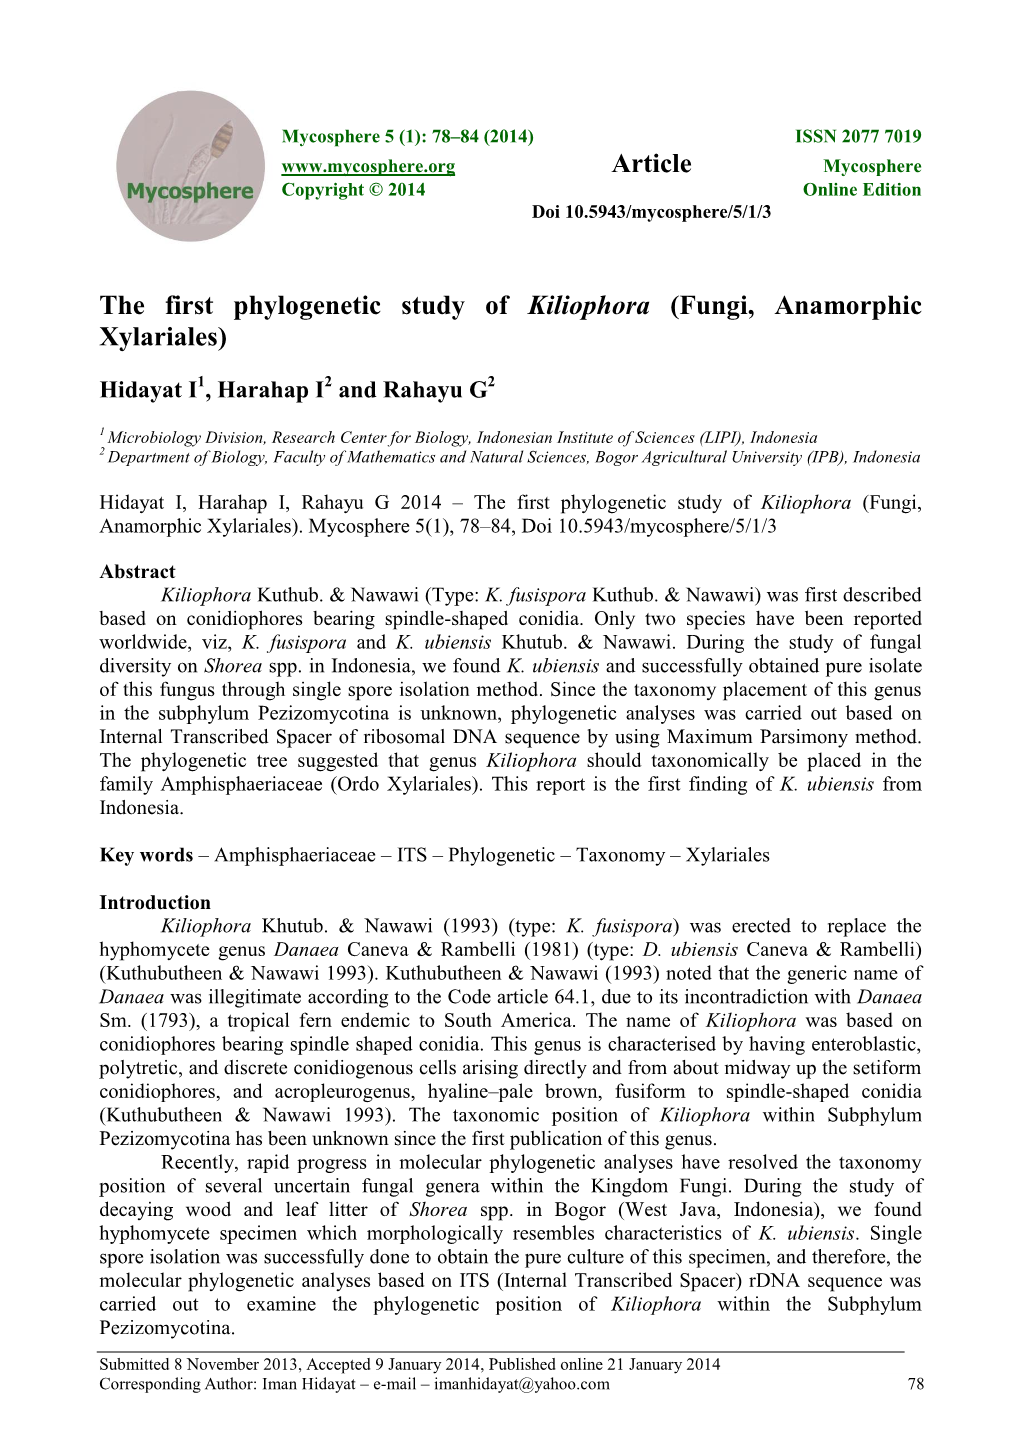 The First Phylogenetic Study of Kiliophora (Fungi, Anamorphic Xylariales)